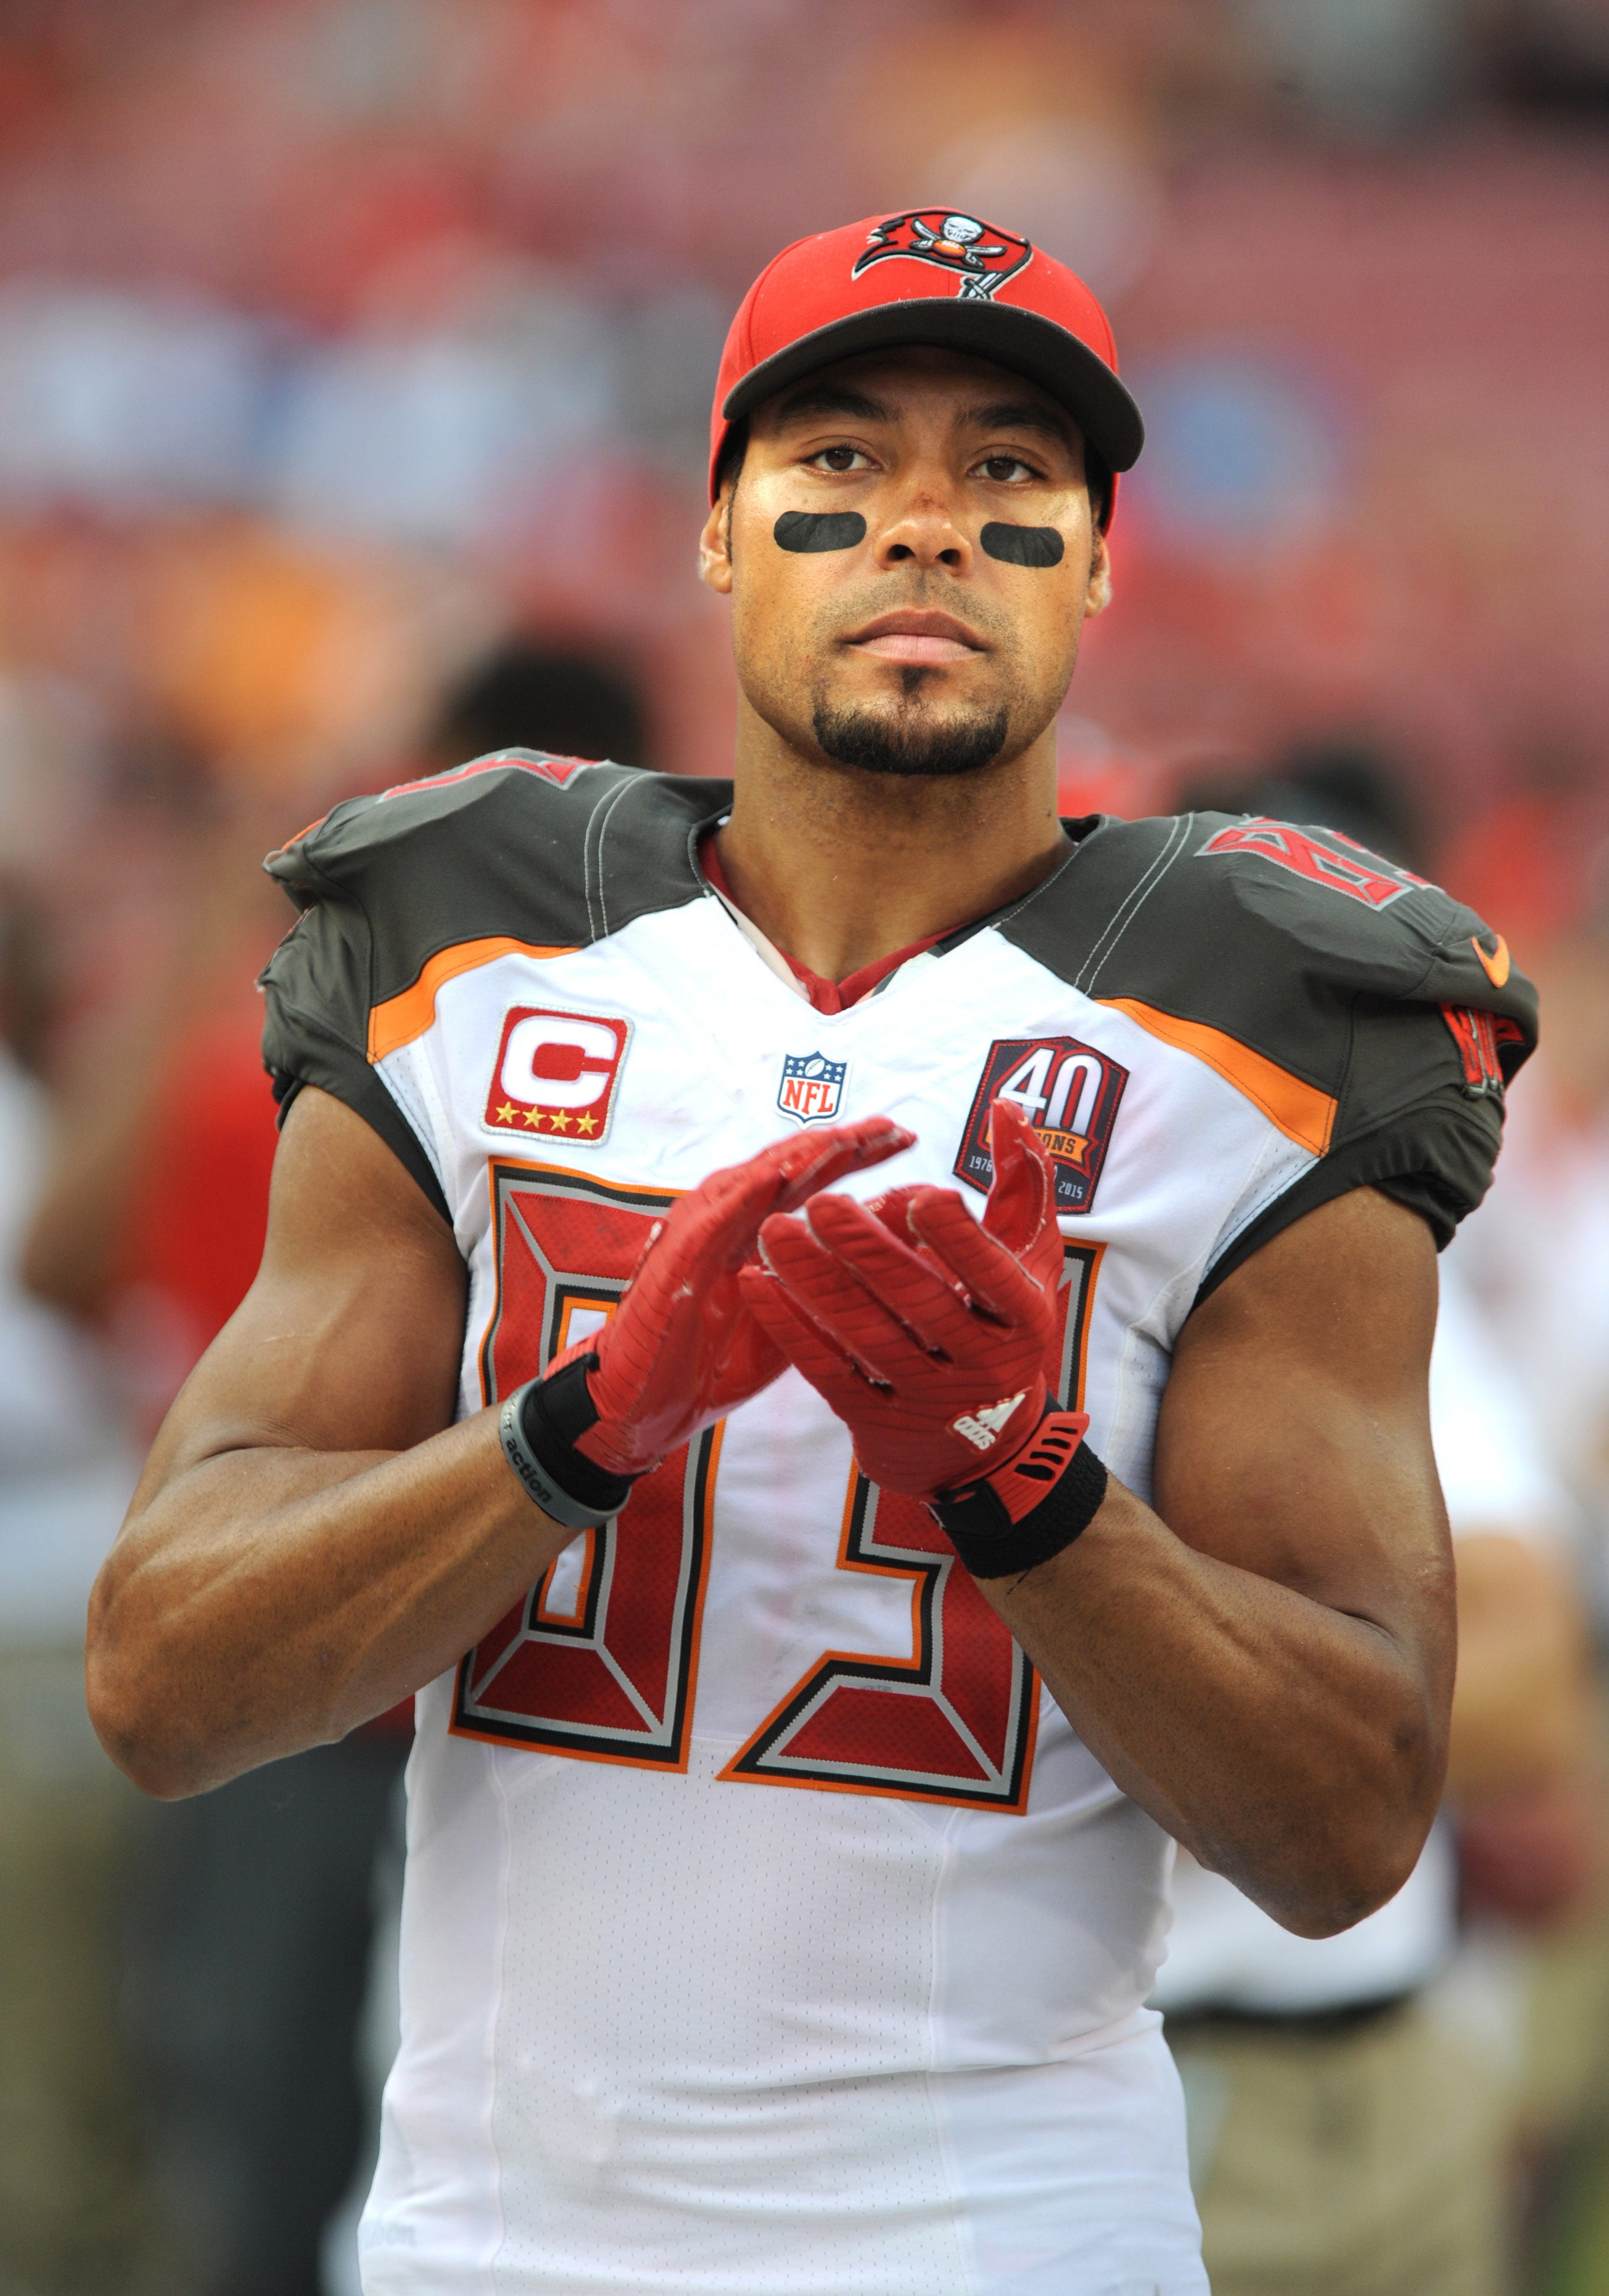 Former NFL wide receiver Vincent Jackson who died by suicide diagnosed with stage 2 CTE